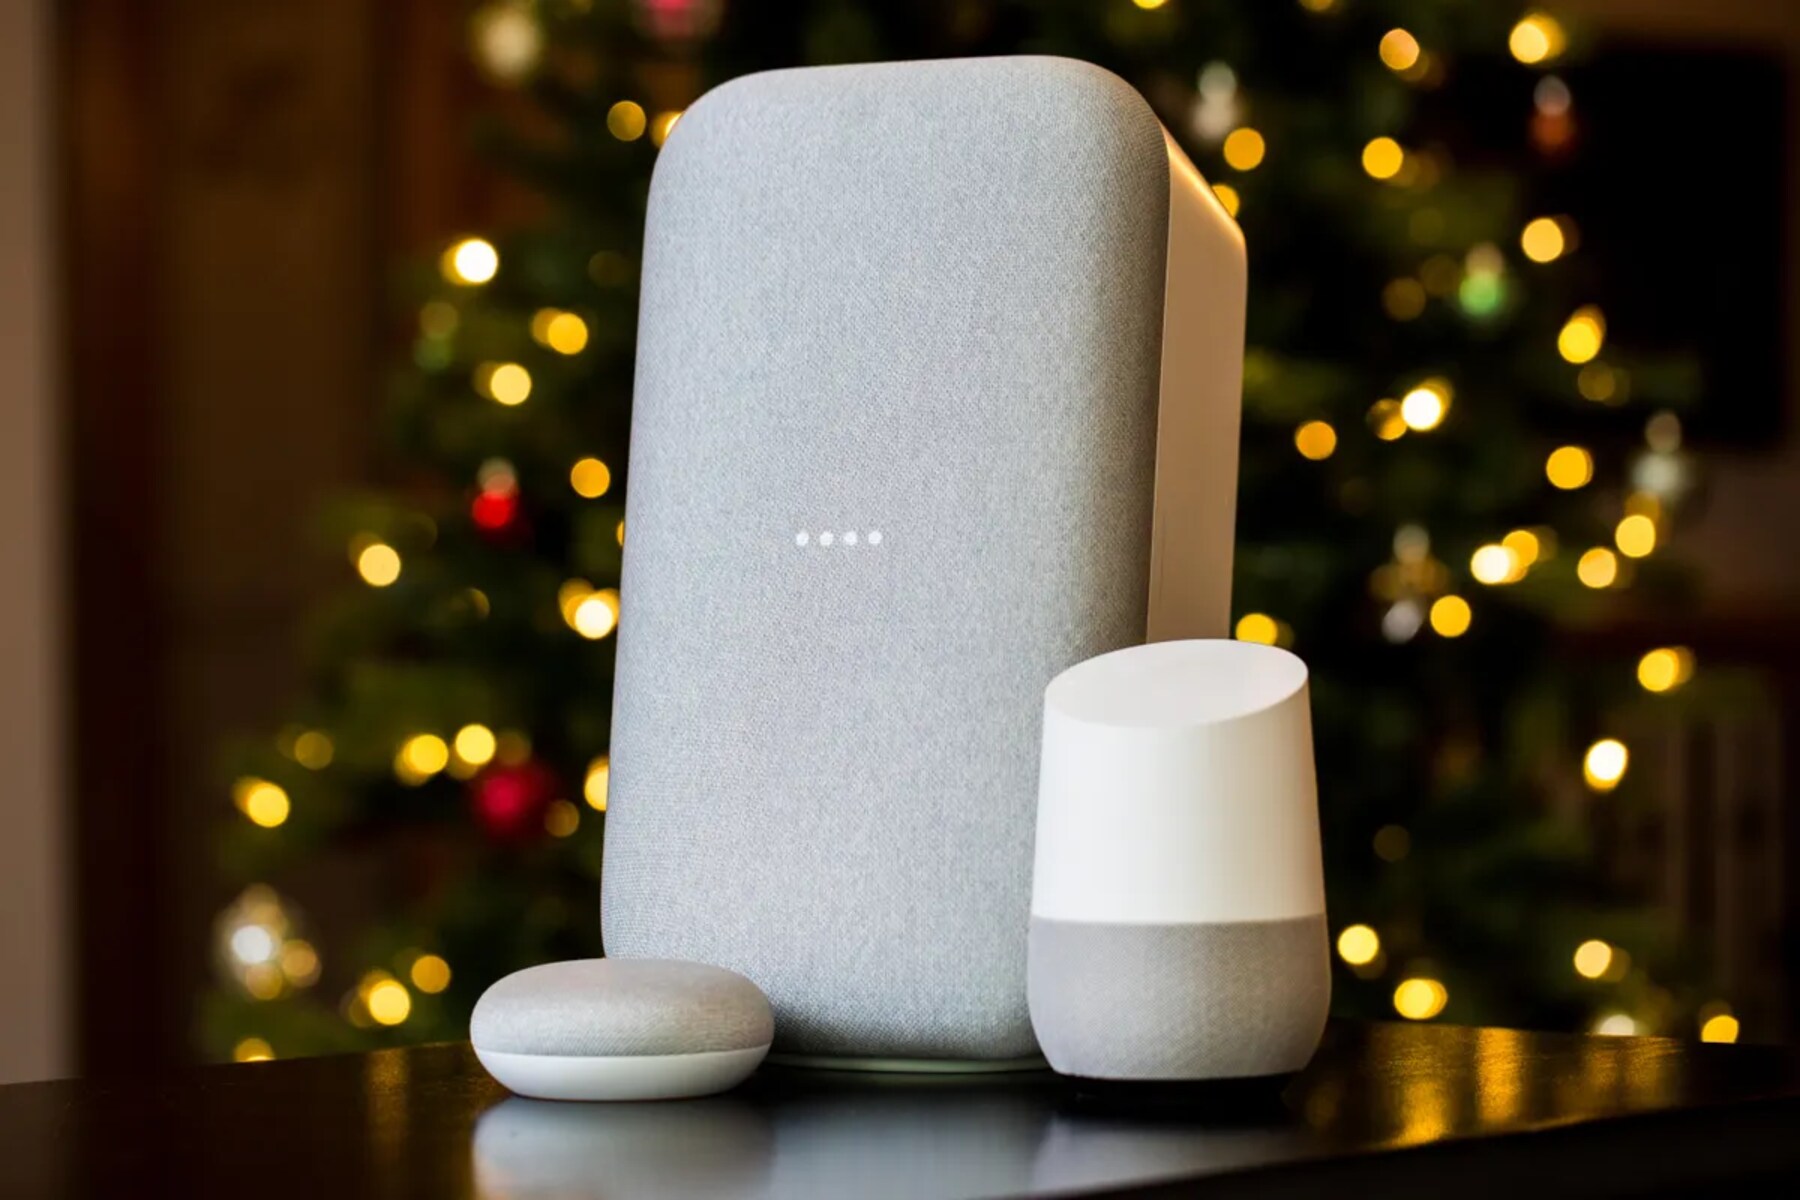 What Is The Quality Of The Google Home Smart Speaker